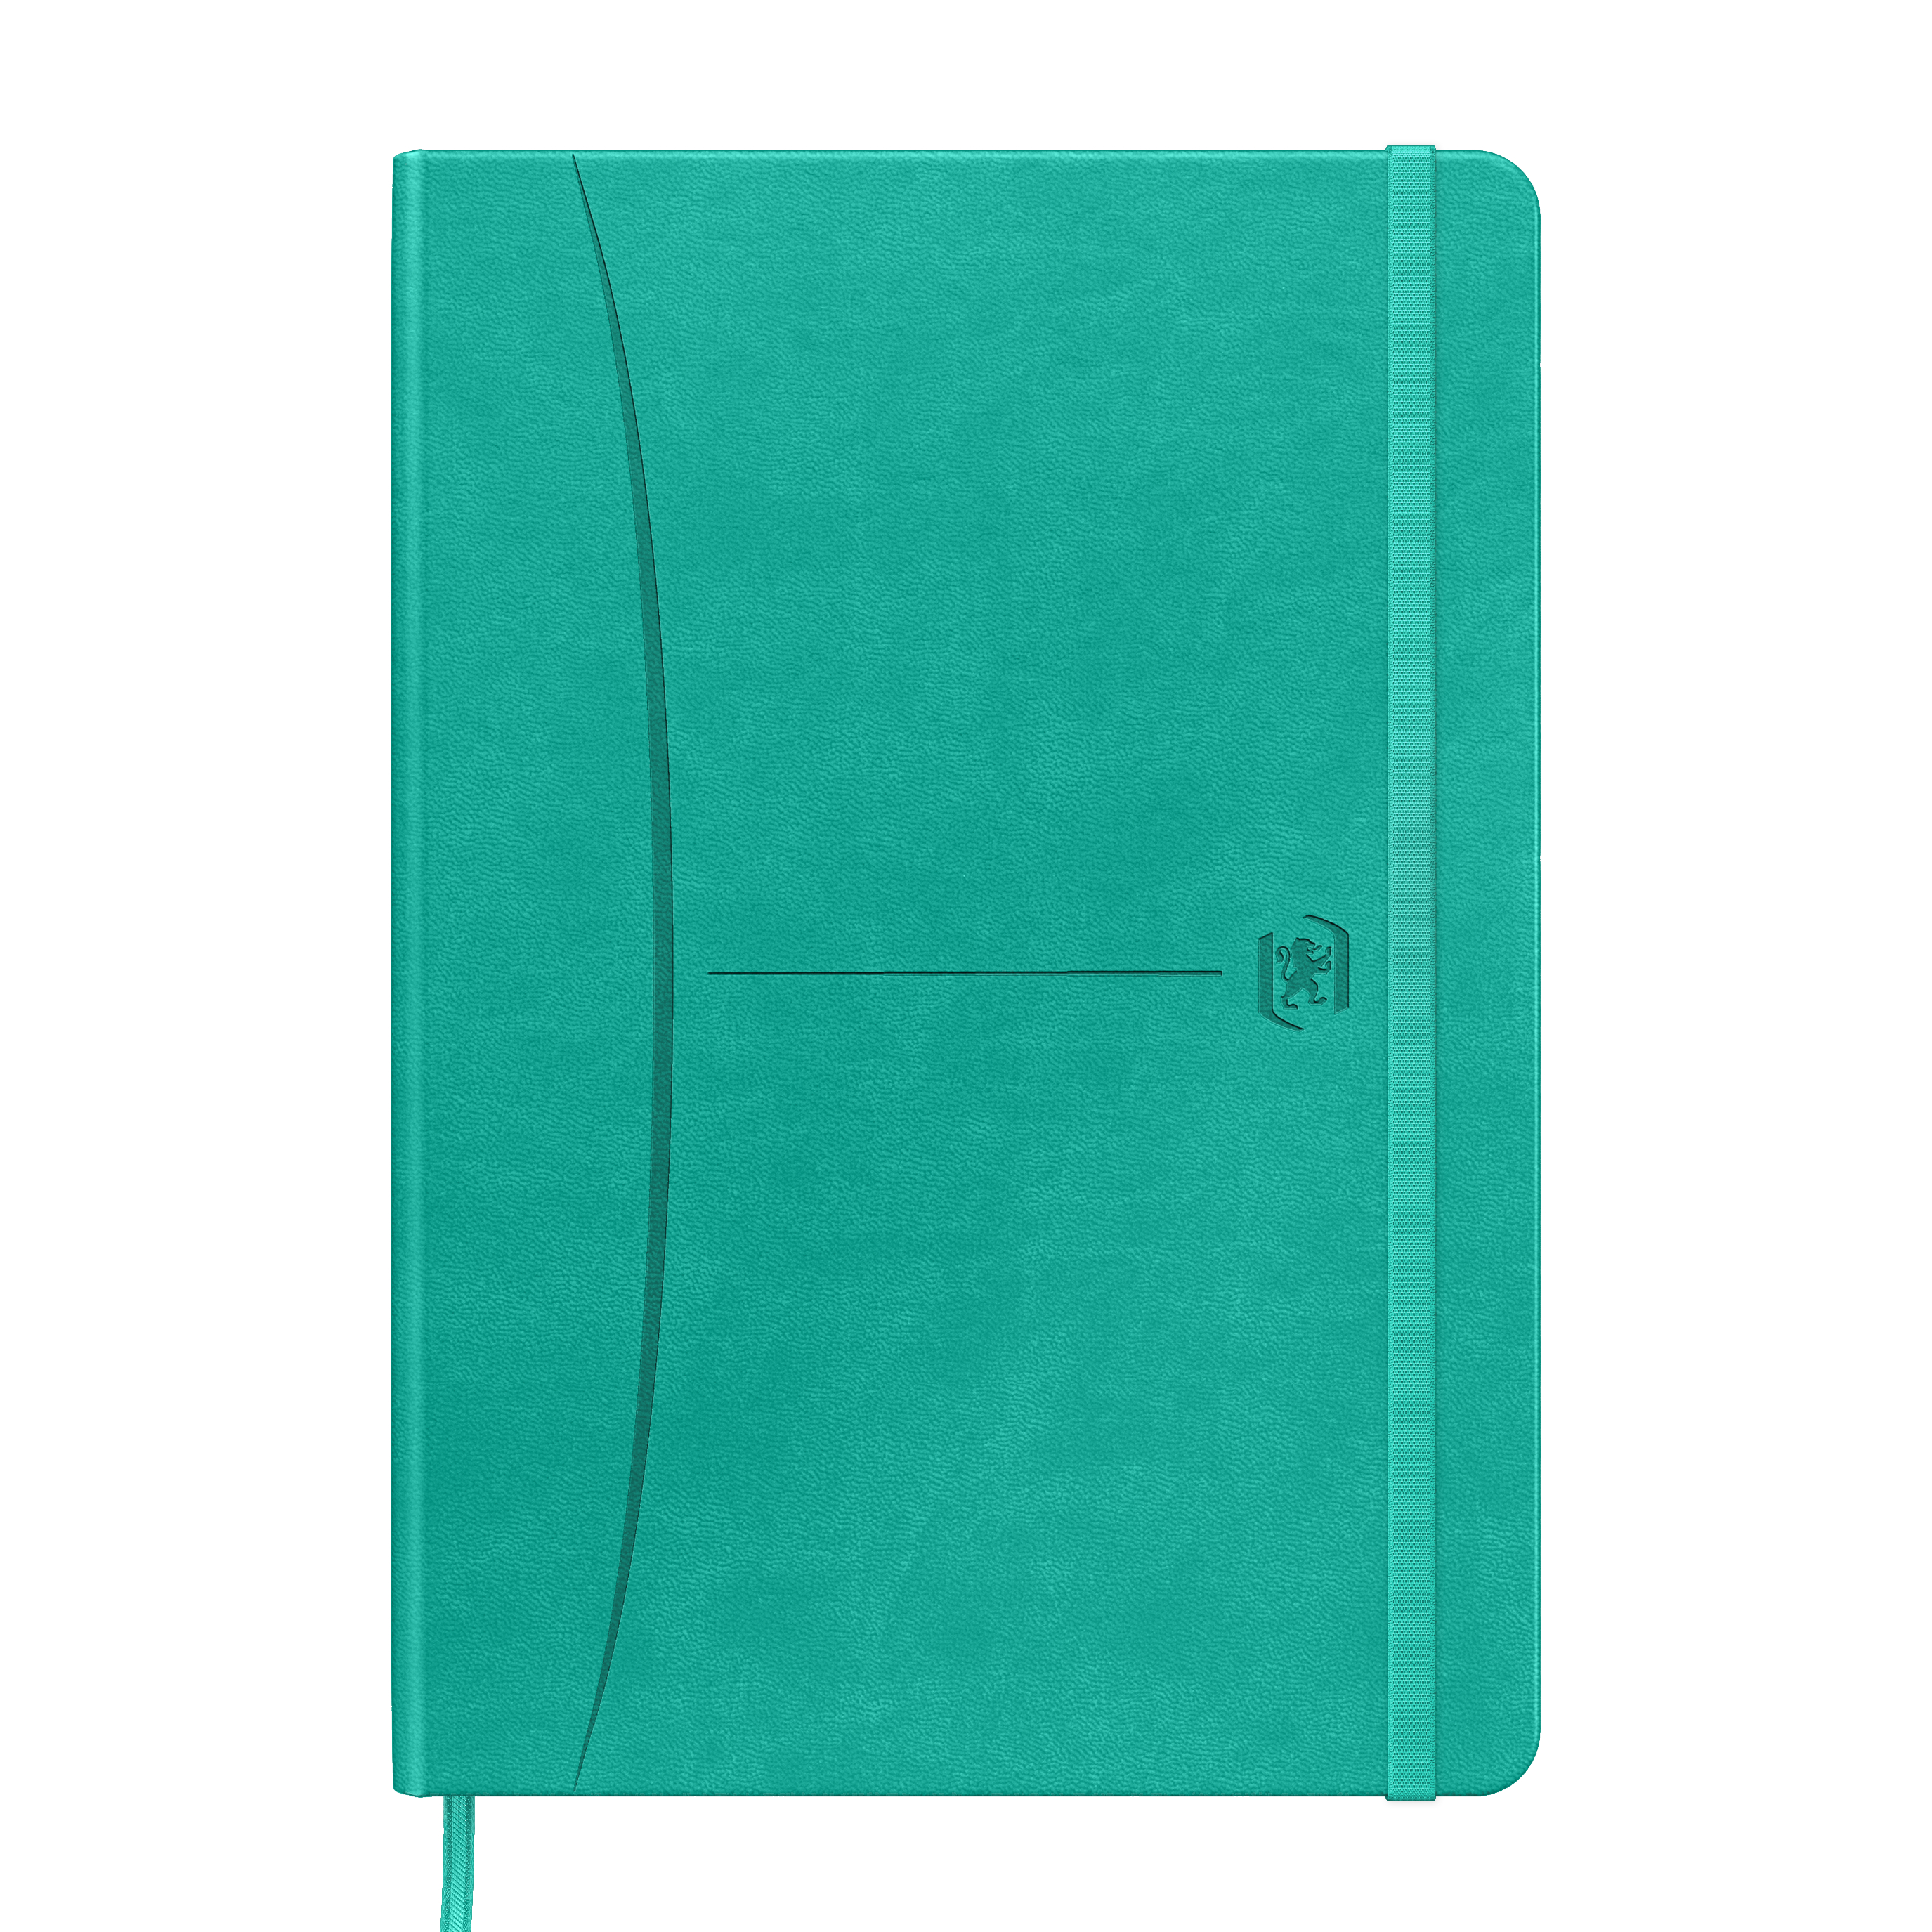 OXFORD Signature Carnet note 400154948 A5, dotted 80 flls, turqu. A5, dotted 80 flls, turqu.